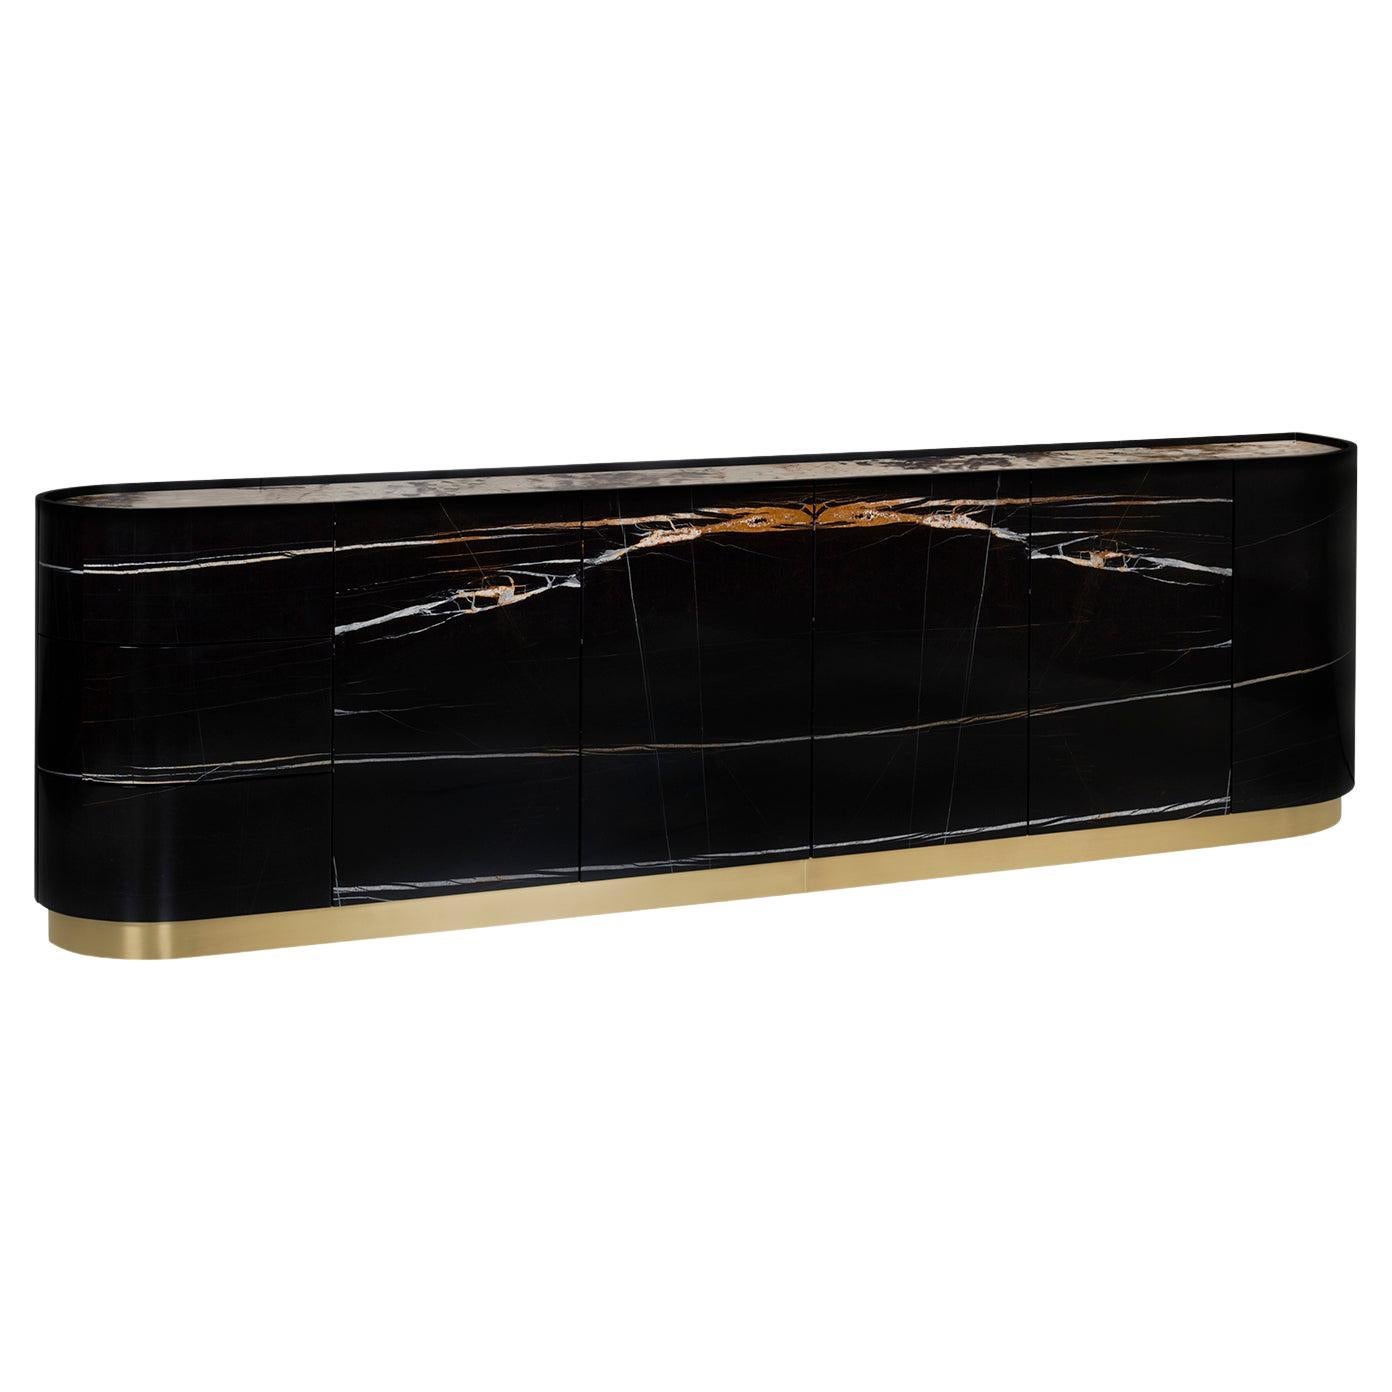 Modern Sahara Cocktail Cabinet, Noir Marble, Handmade in Portugal by Greenapple For Sale